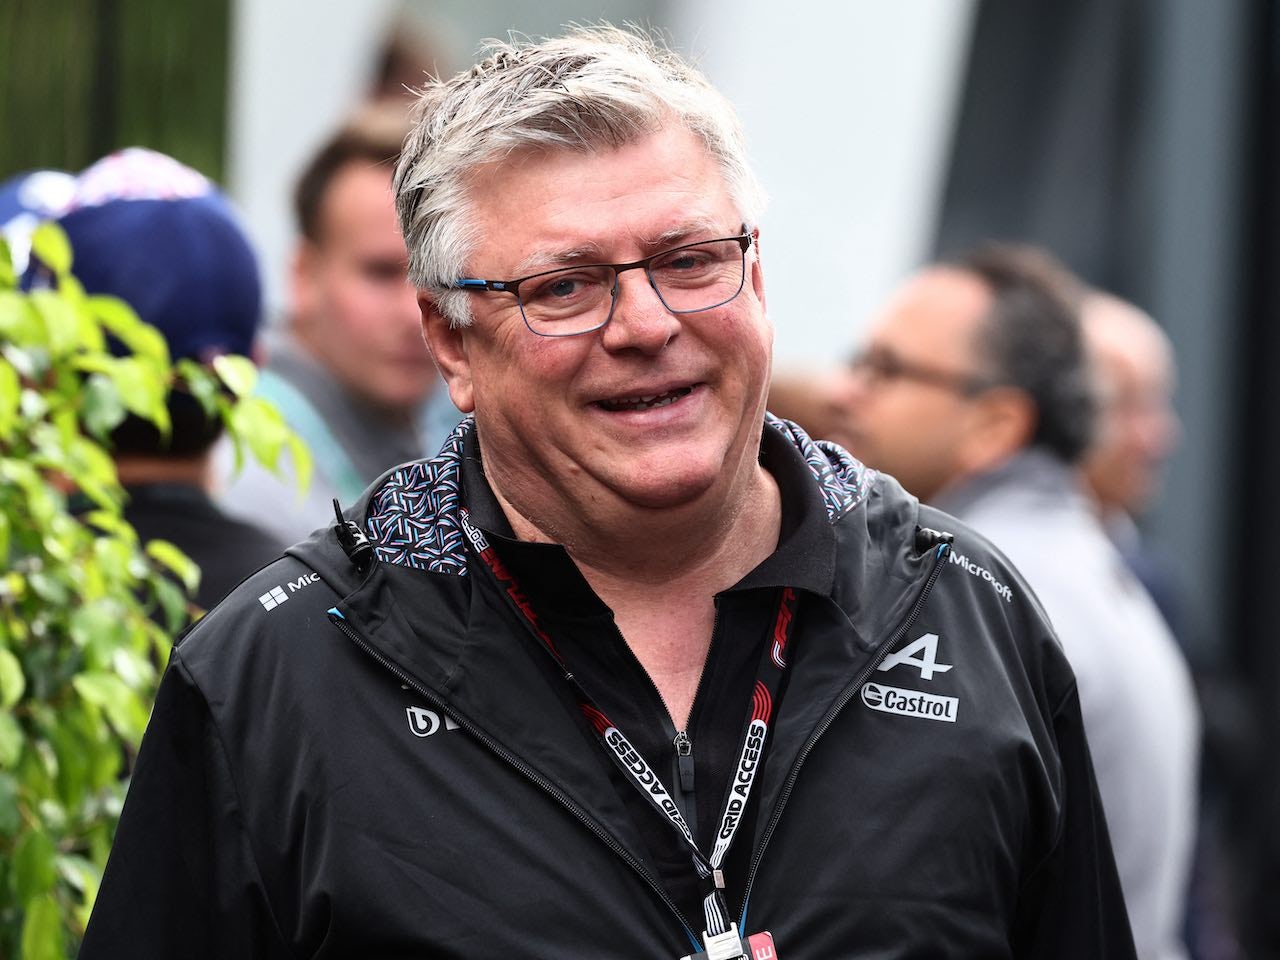 Szafnauer to 'lose weight' after F1 sacking